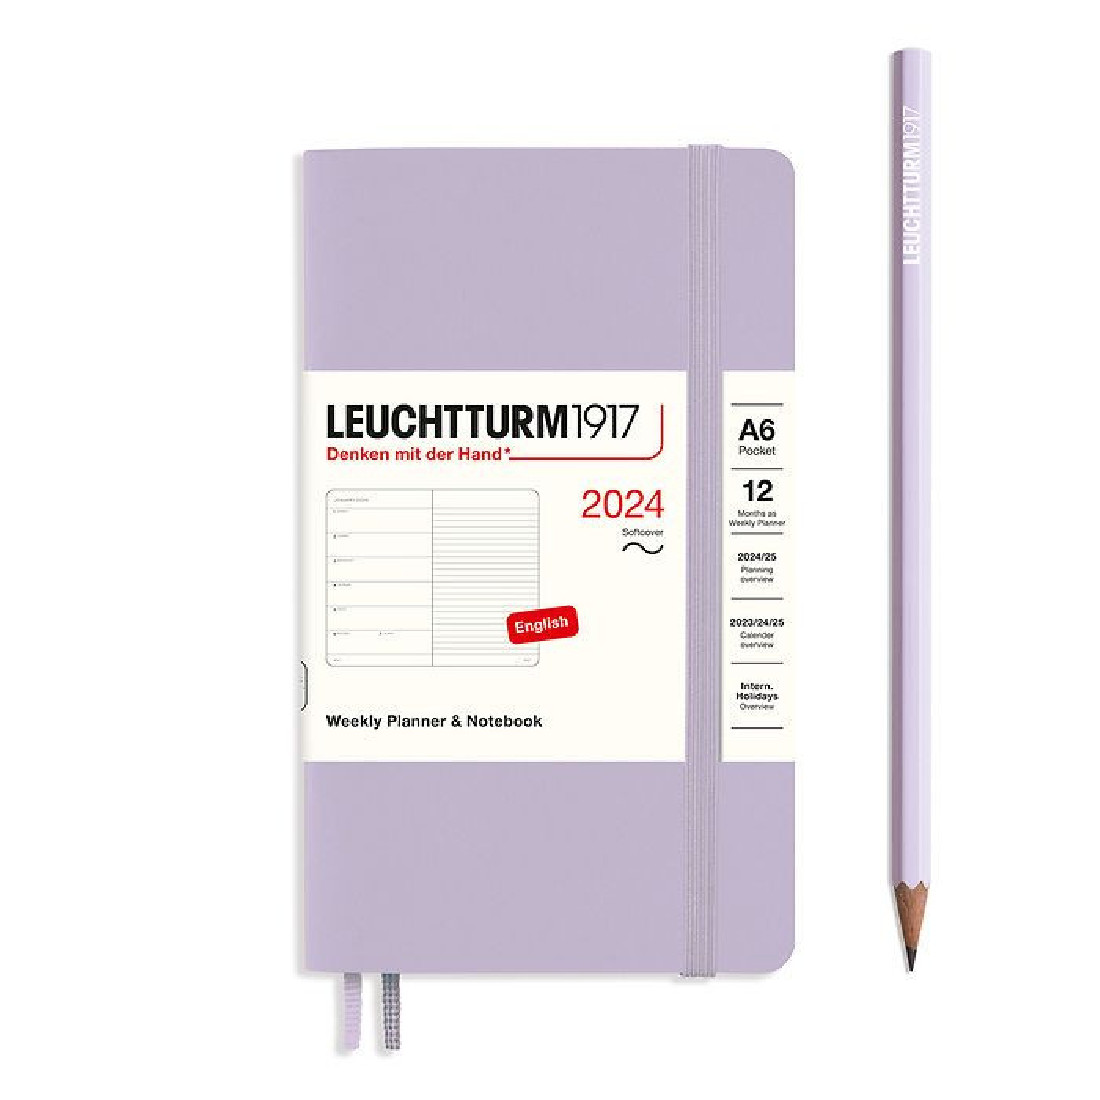 Leuchtturm 1917 Weekly Planner and Notebook 2024 Lilac Pocket A6 Soft Cover